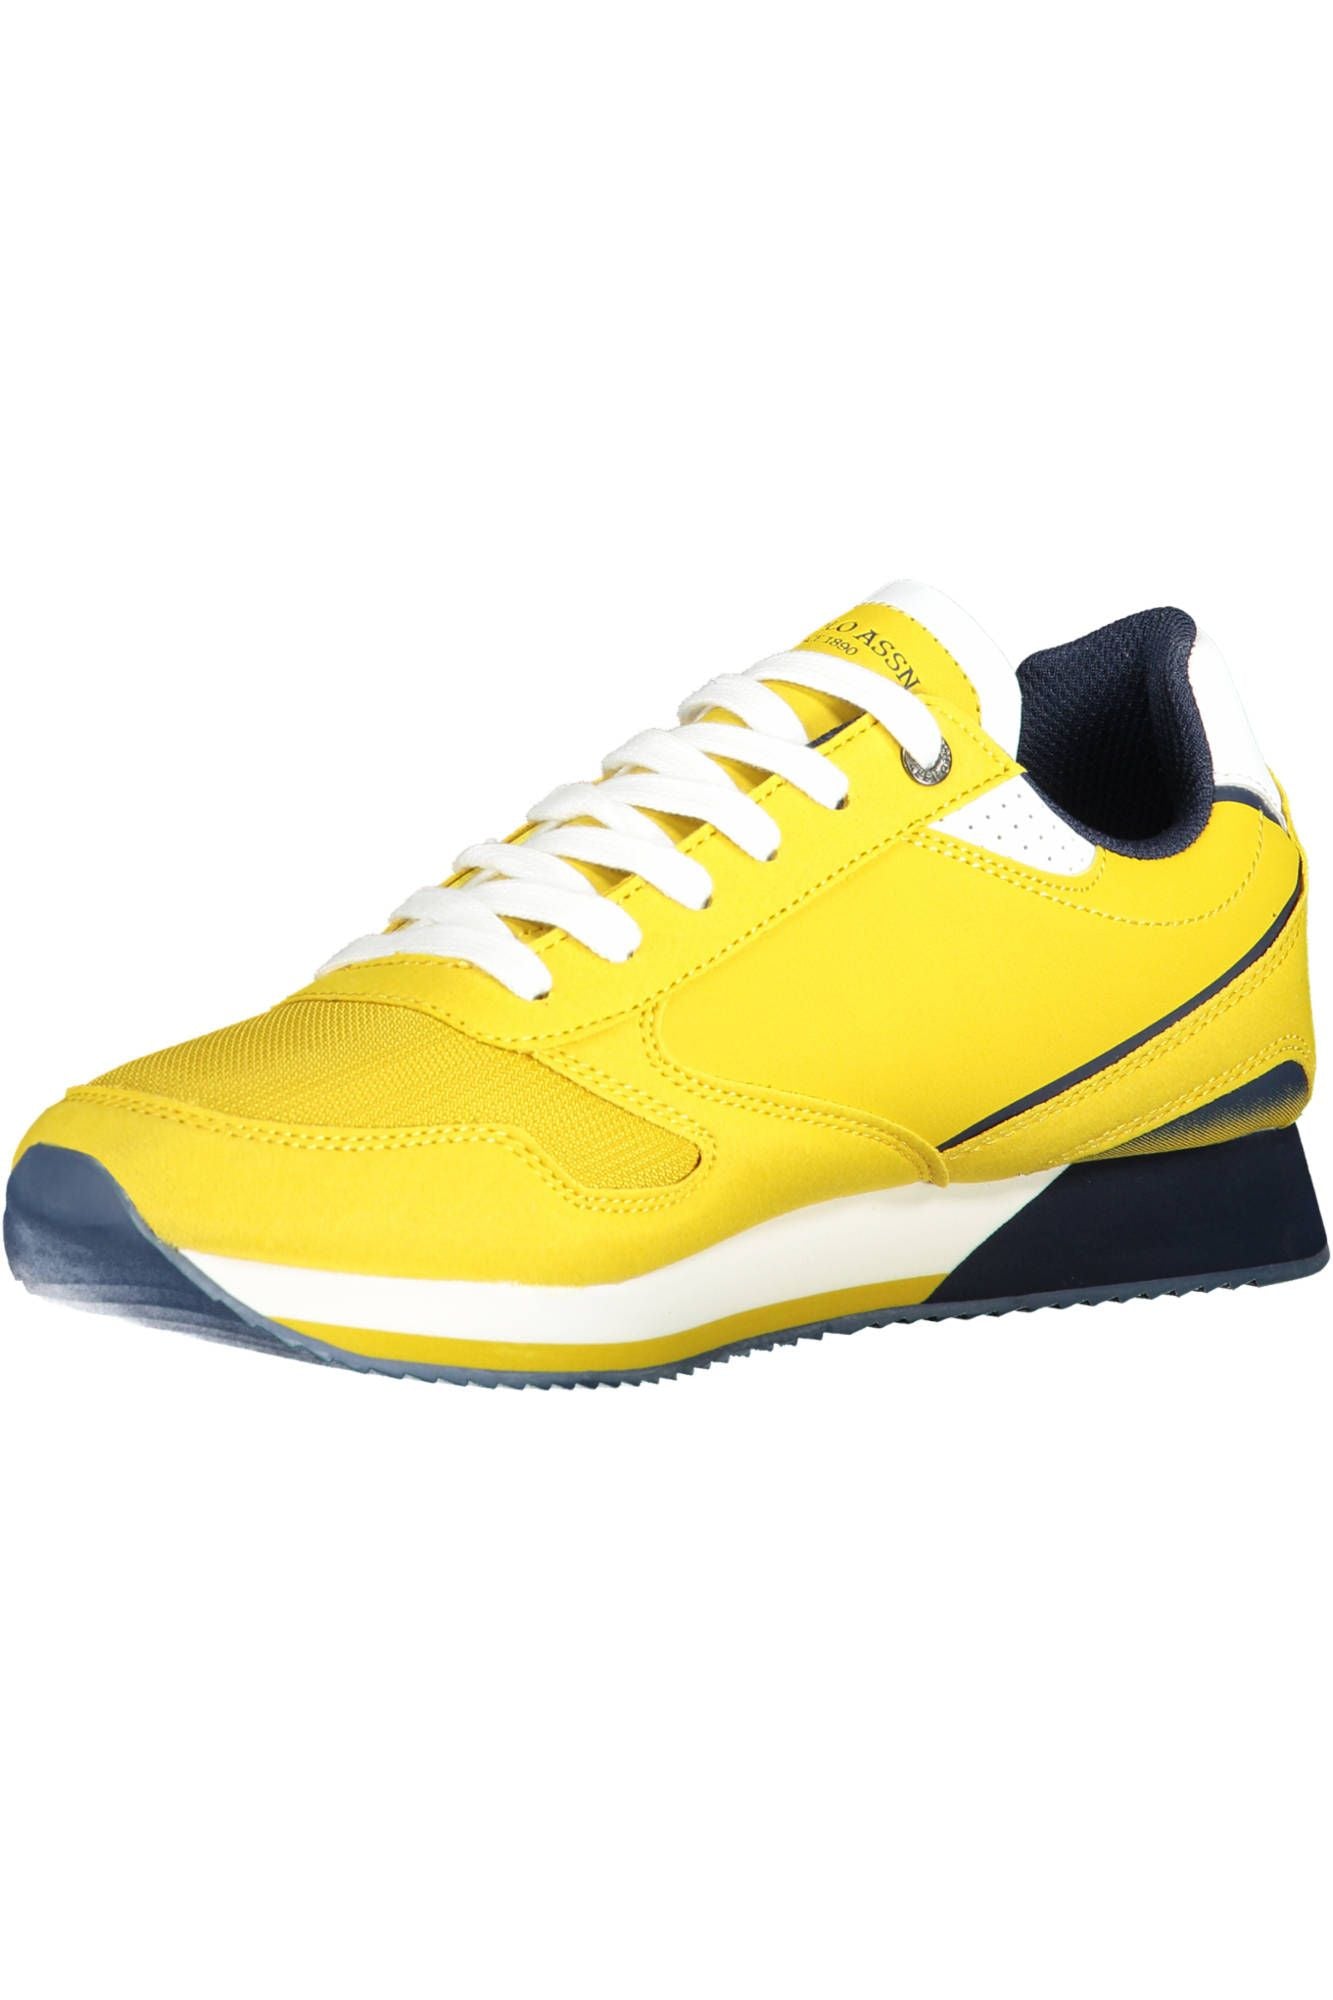 U.S. POLO ASSN. Bold Yellow Laced Sports Sneaker